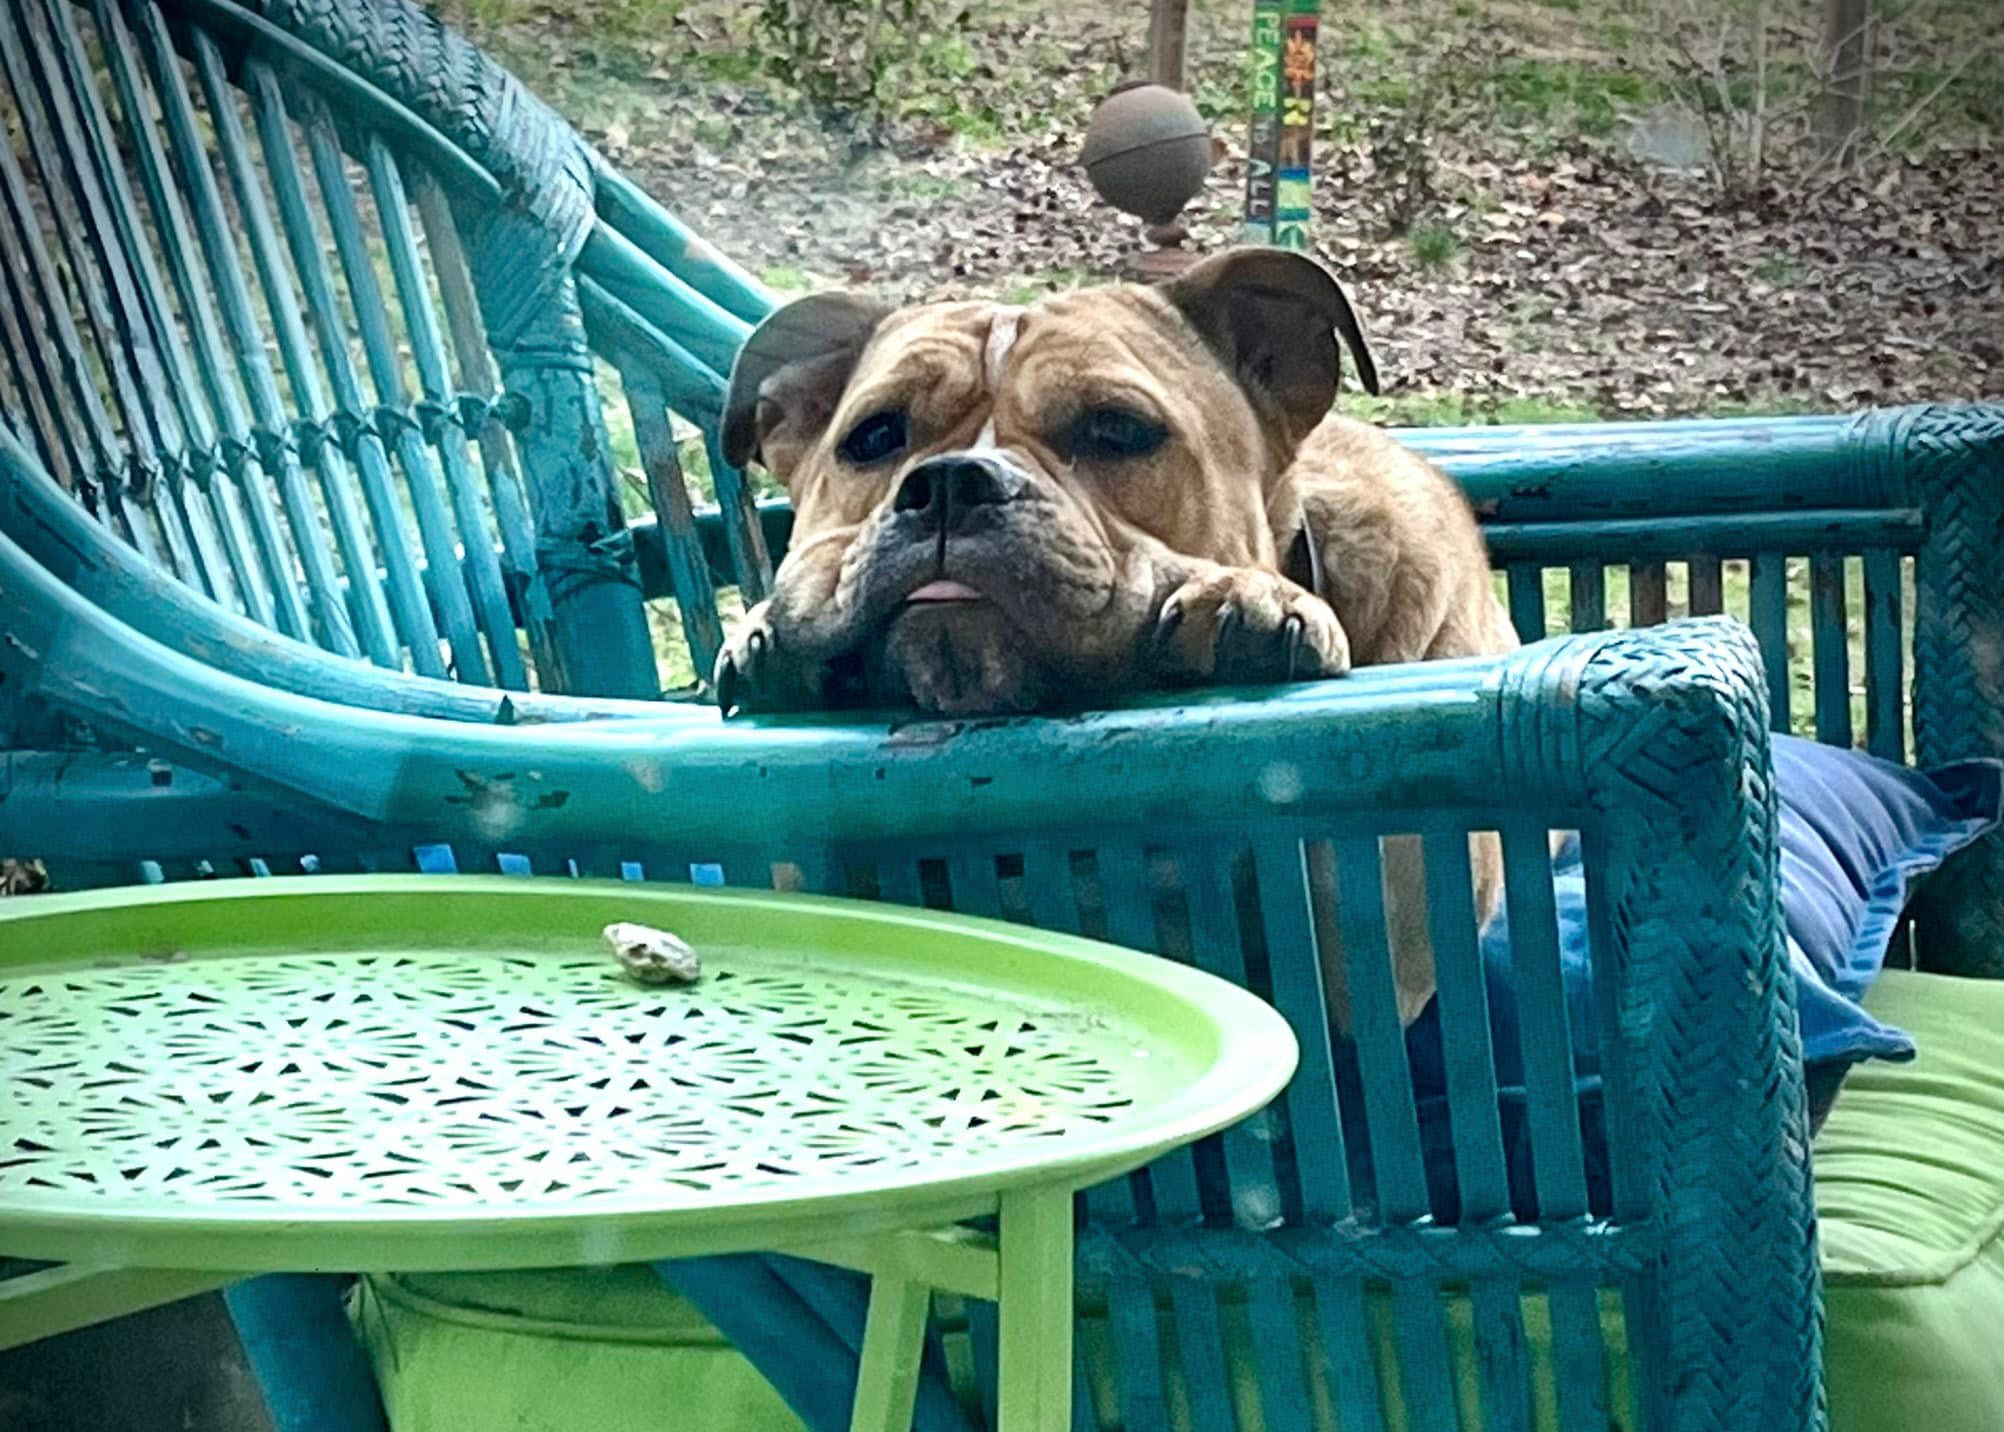 Miss Piggy the dog sitting on a chair in the garden.